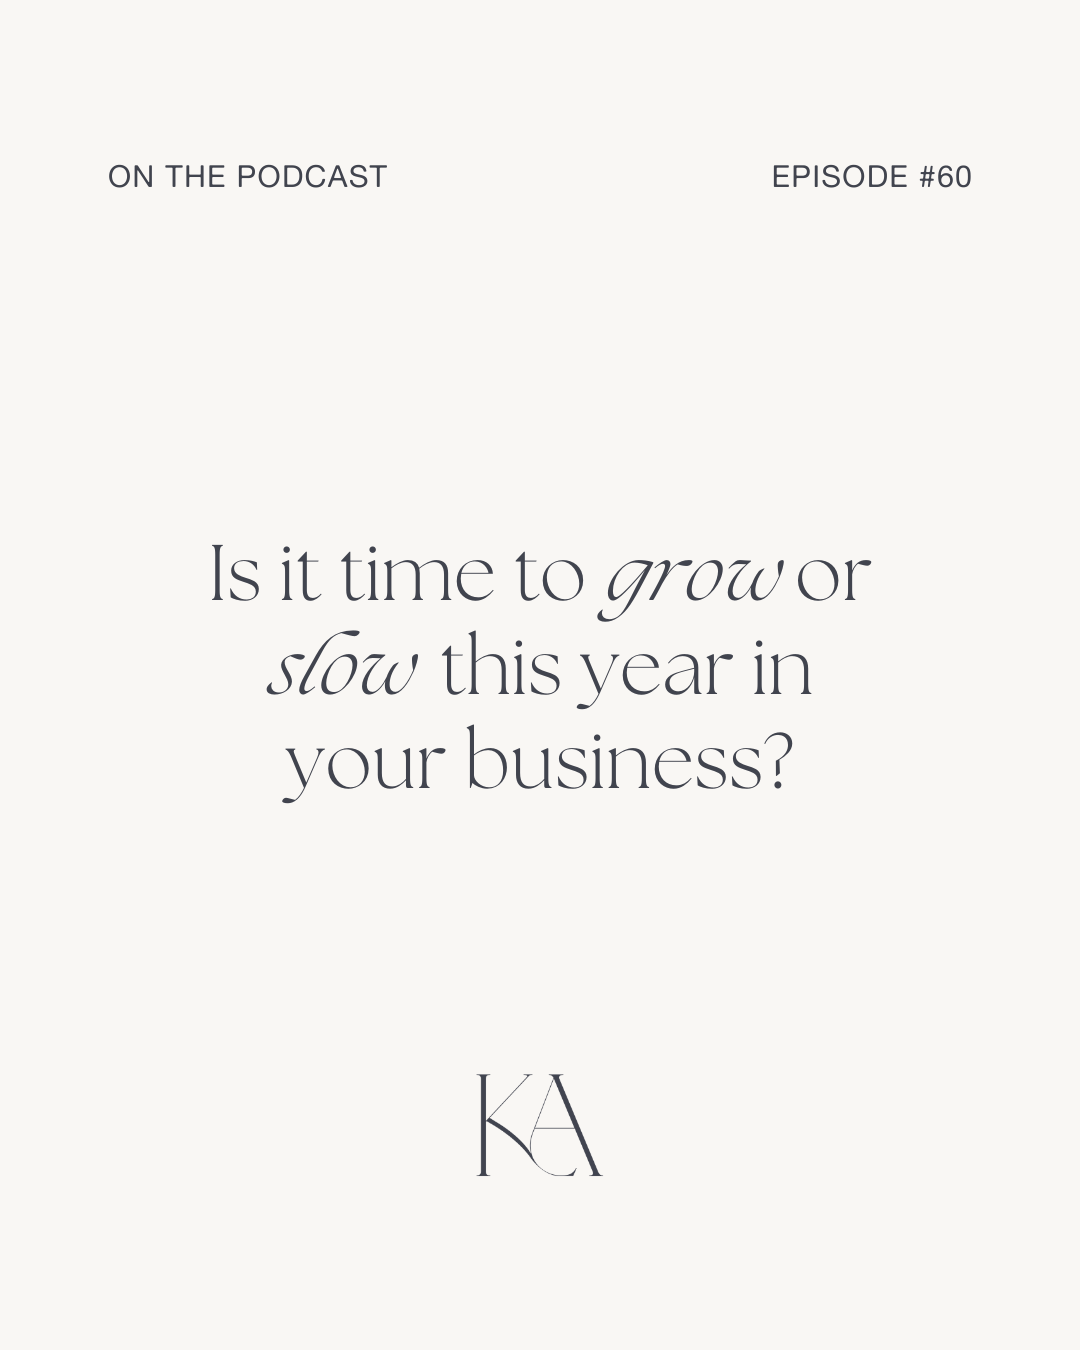 Is it time to grow or slow this year in your business?